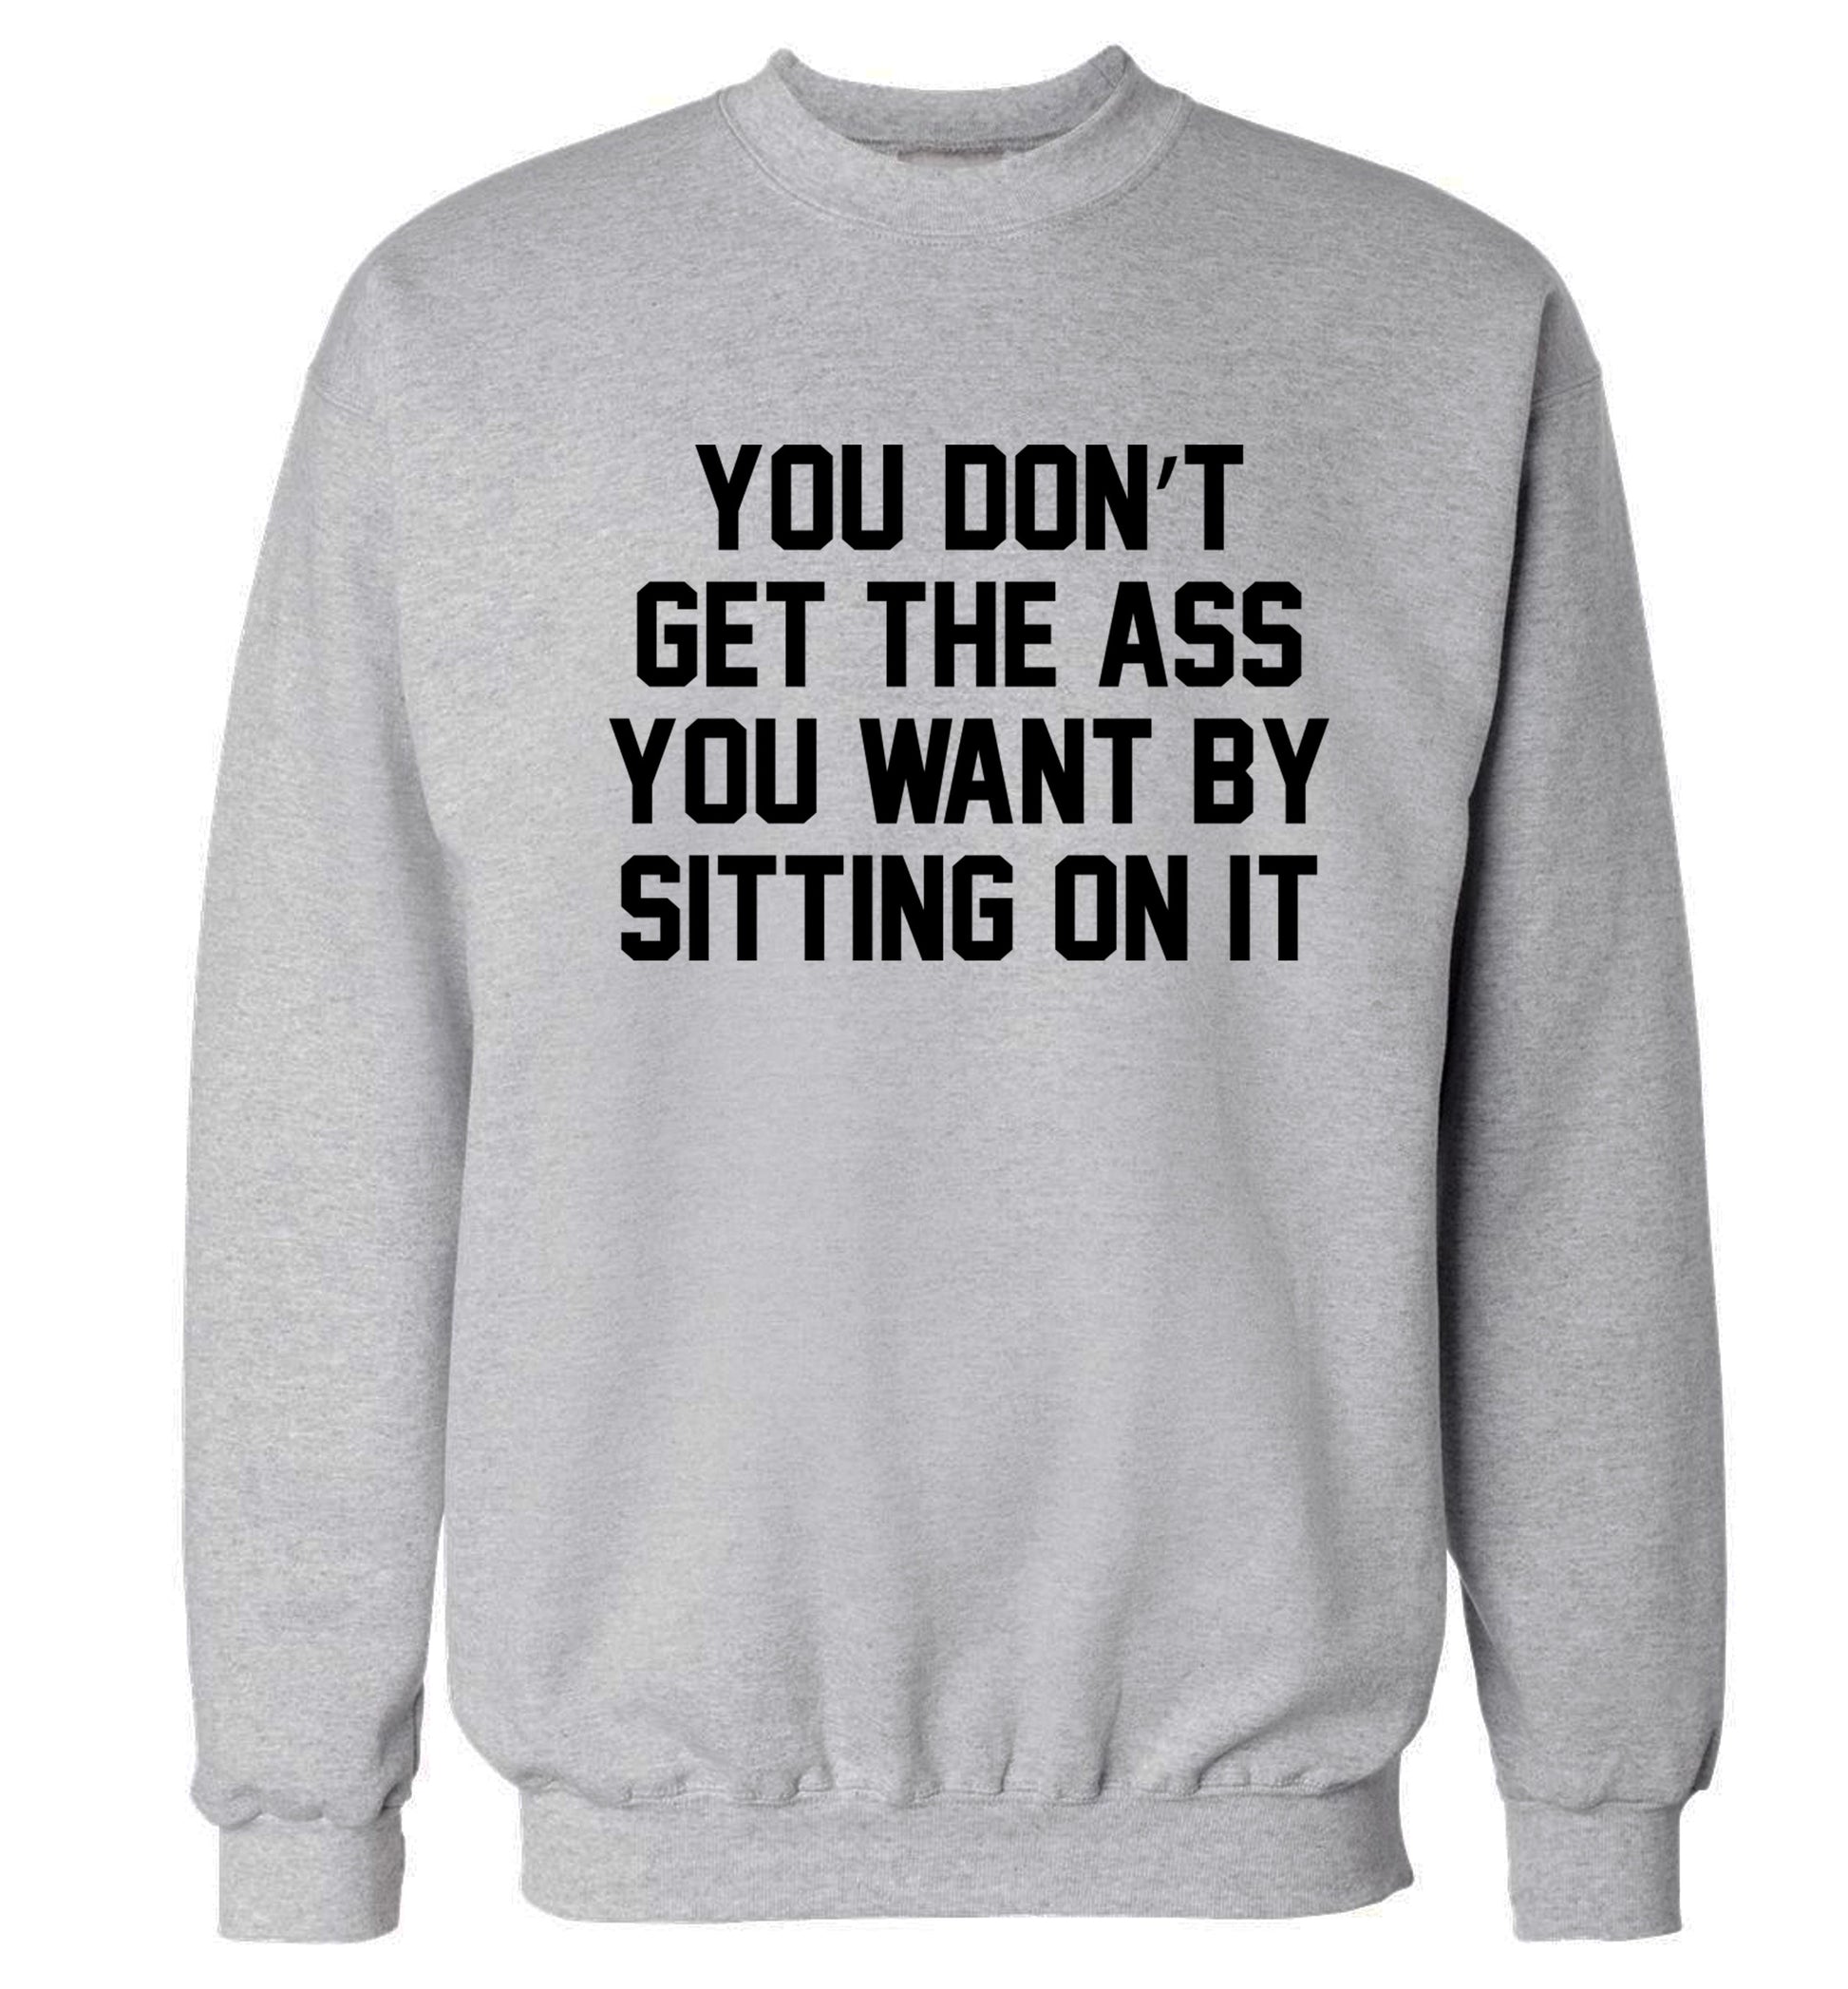 You don't get the ass you want by sitting on it Adult's unisex grey Sweater 2XL